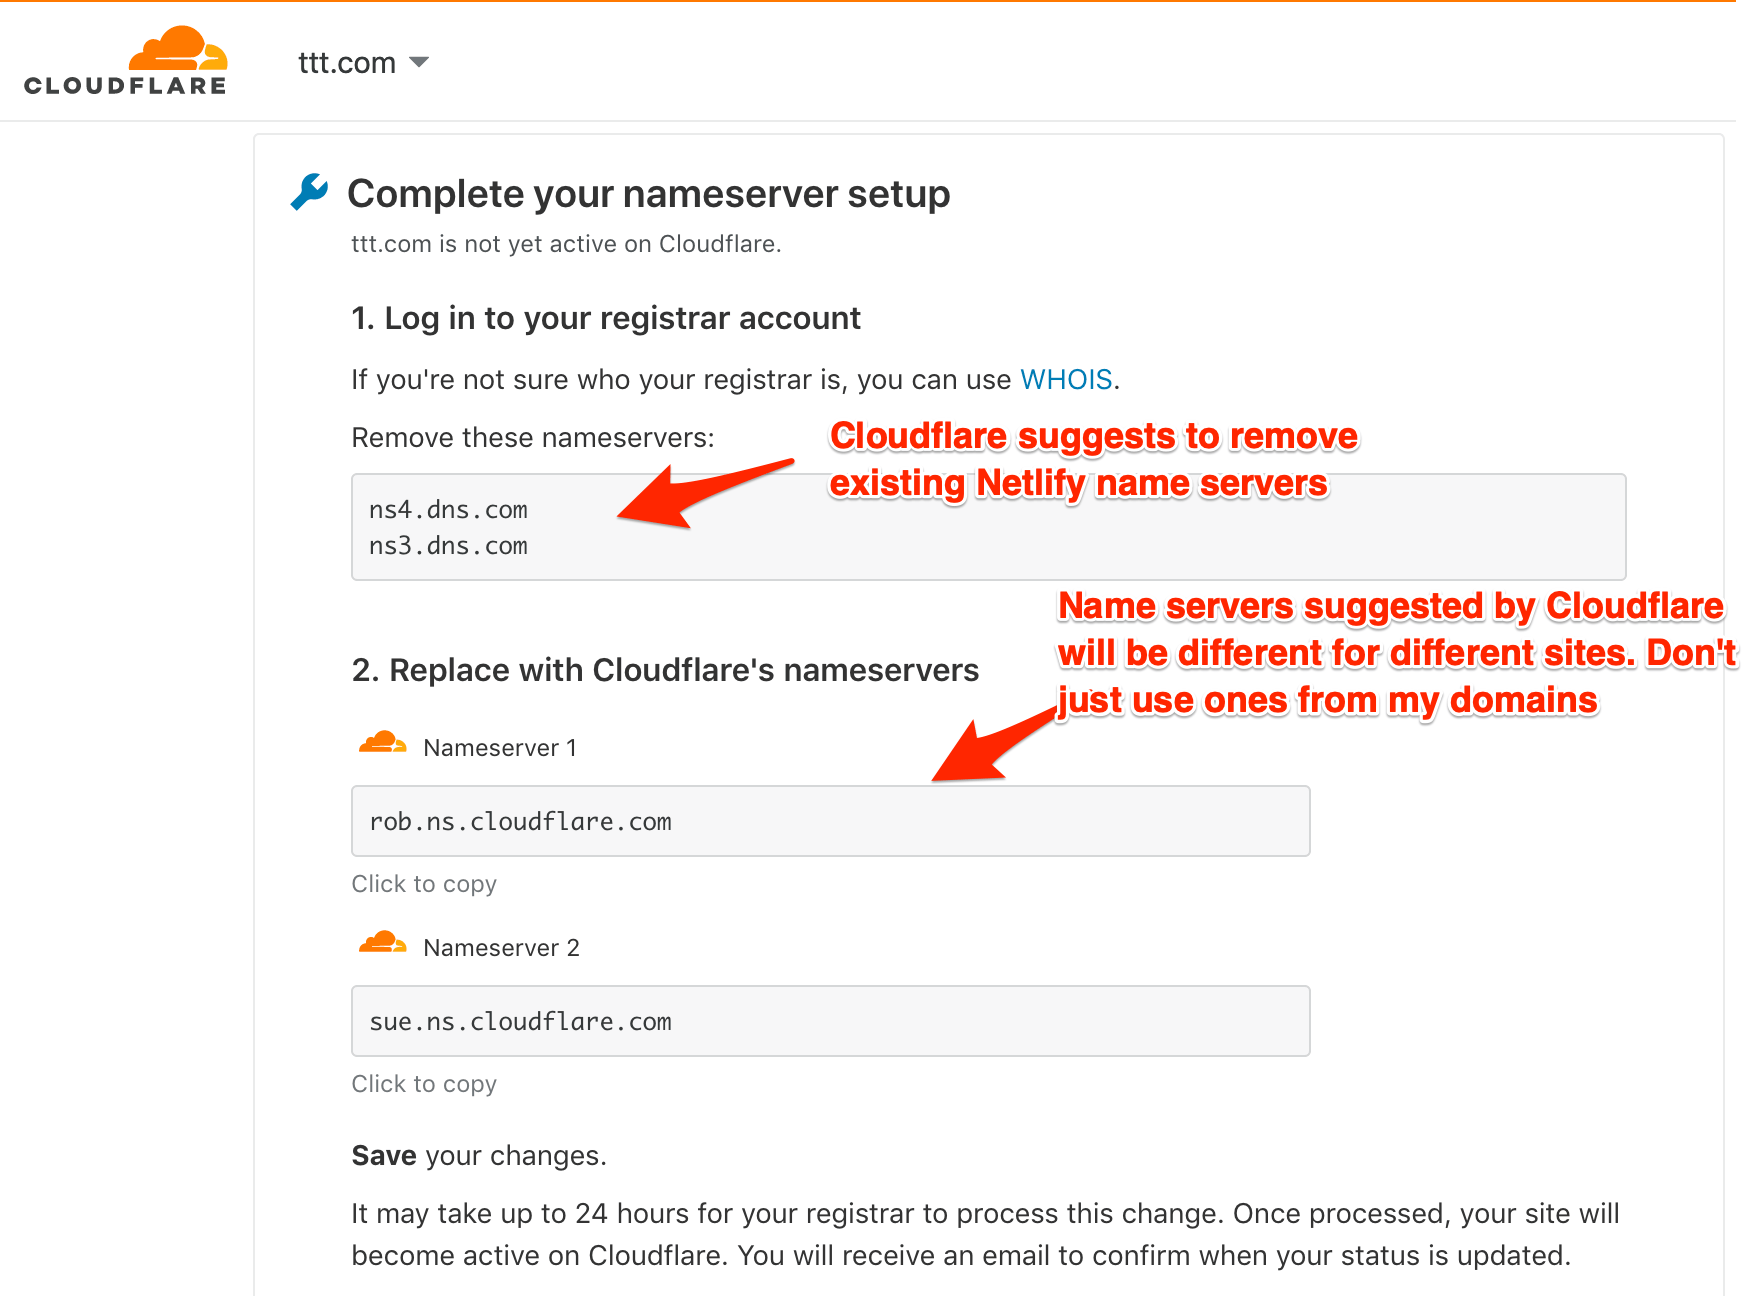 Cloudflare&rsquo;s suggestions on DNS name servers